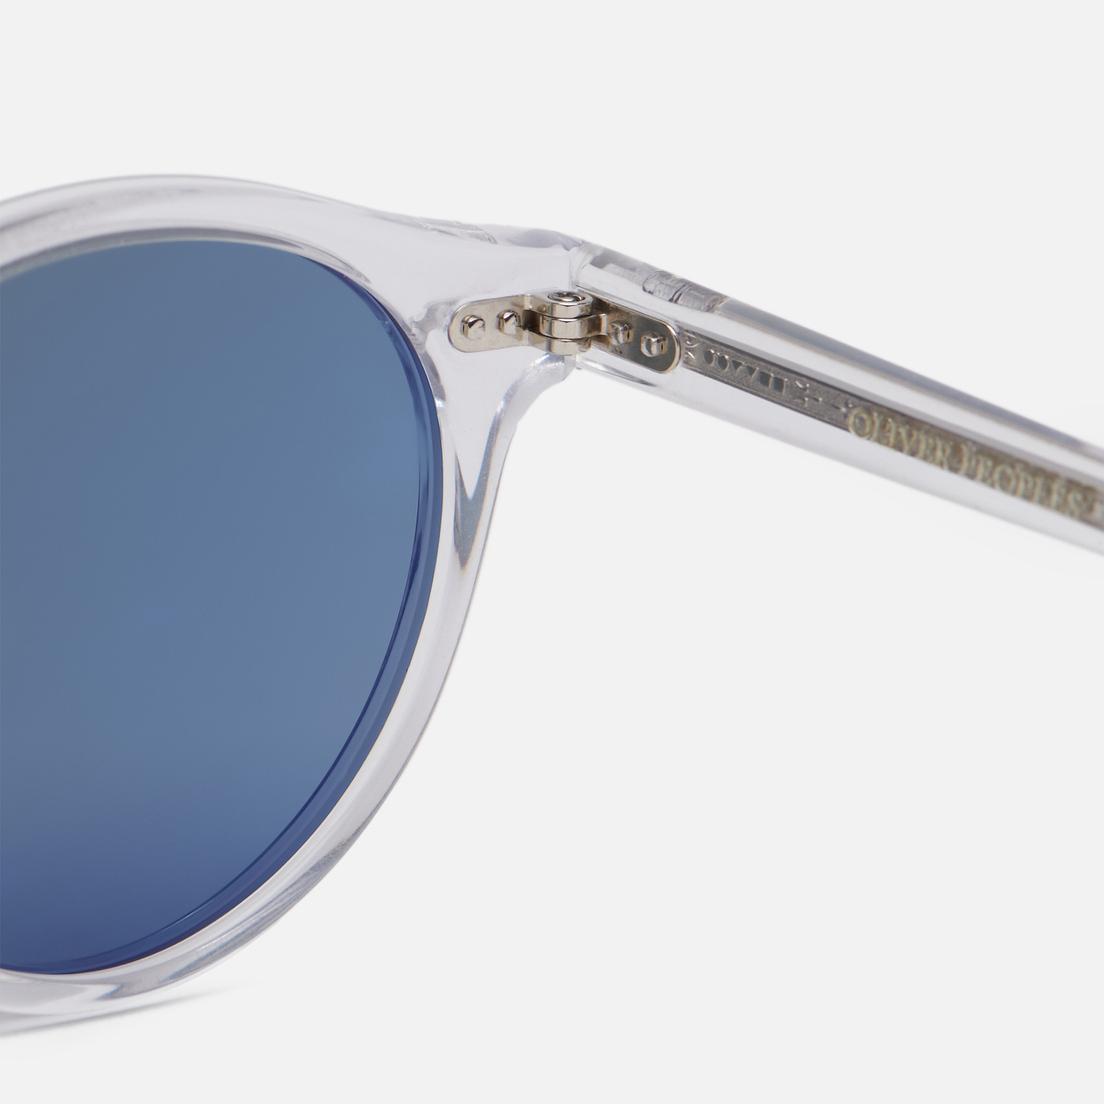 Oliver Peoples Солнцезащитные очки Gregory Peck